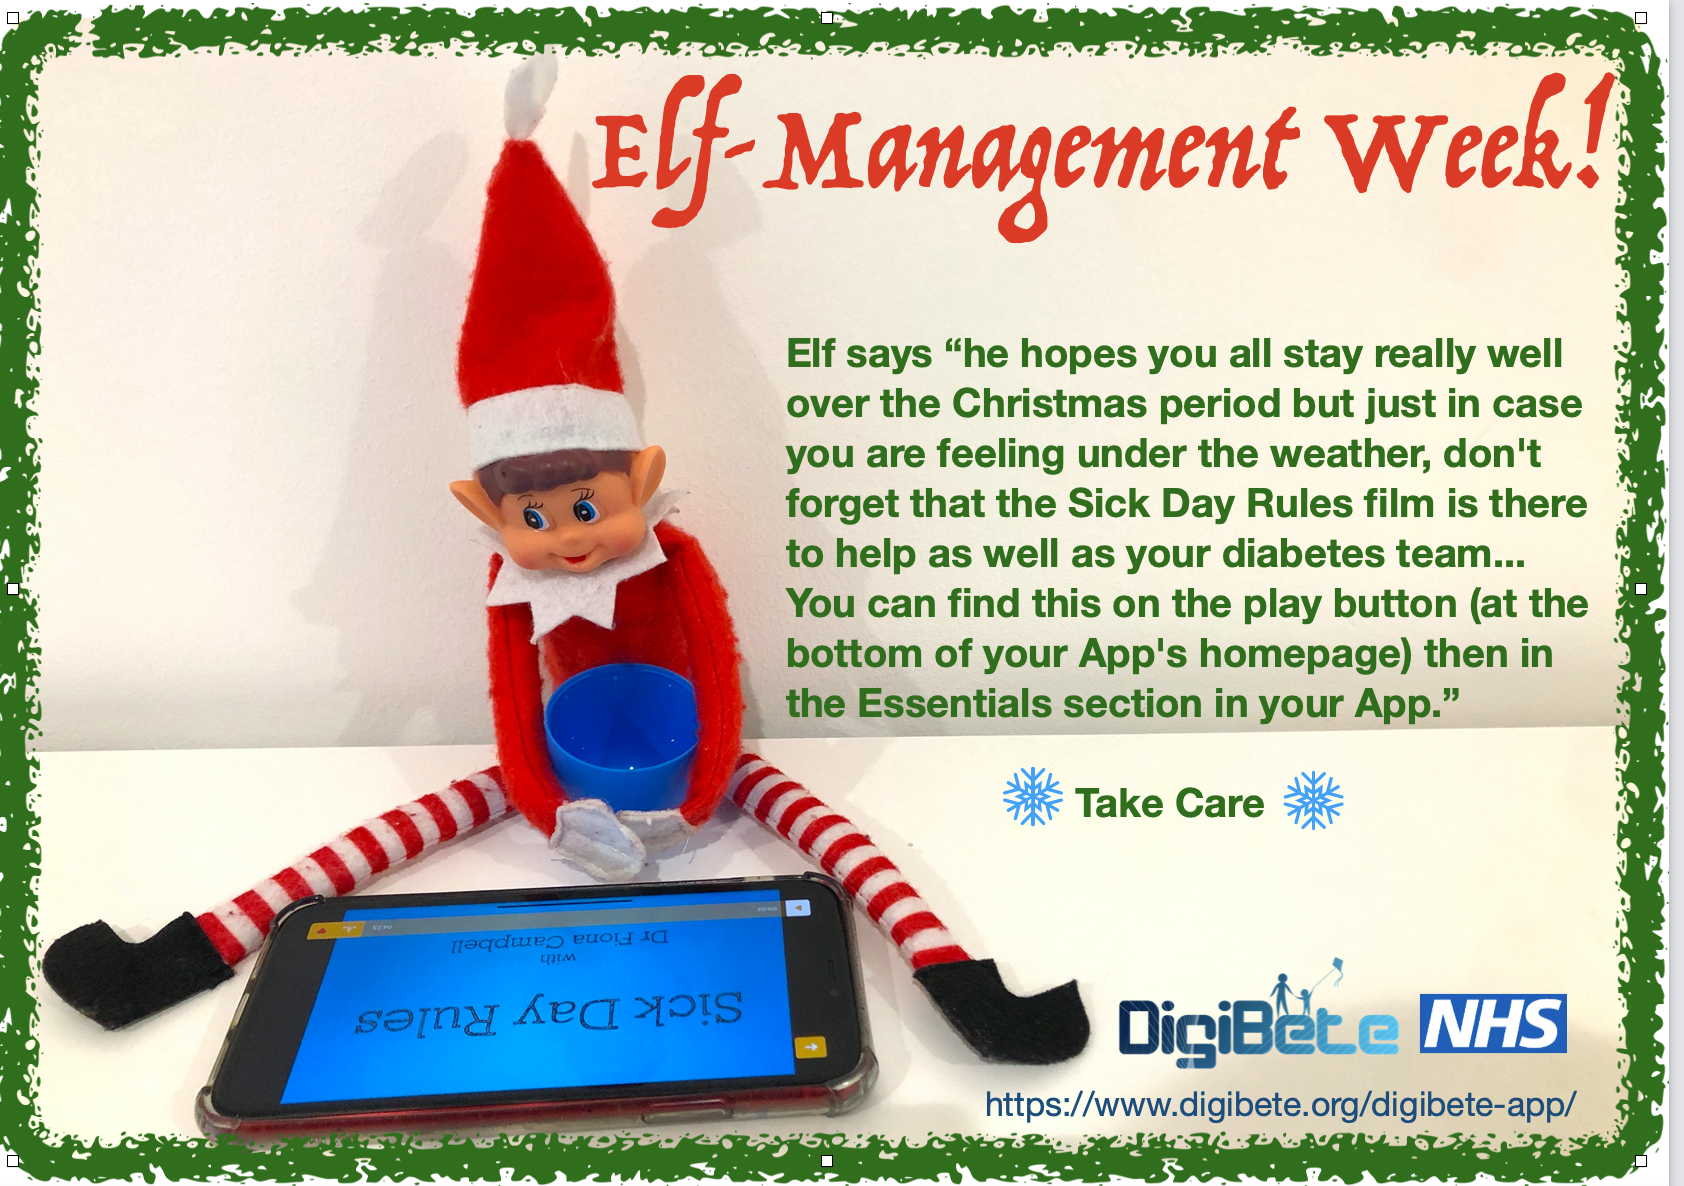 Elf-Management #2 - Sick Day Rules